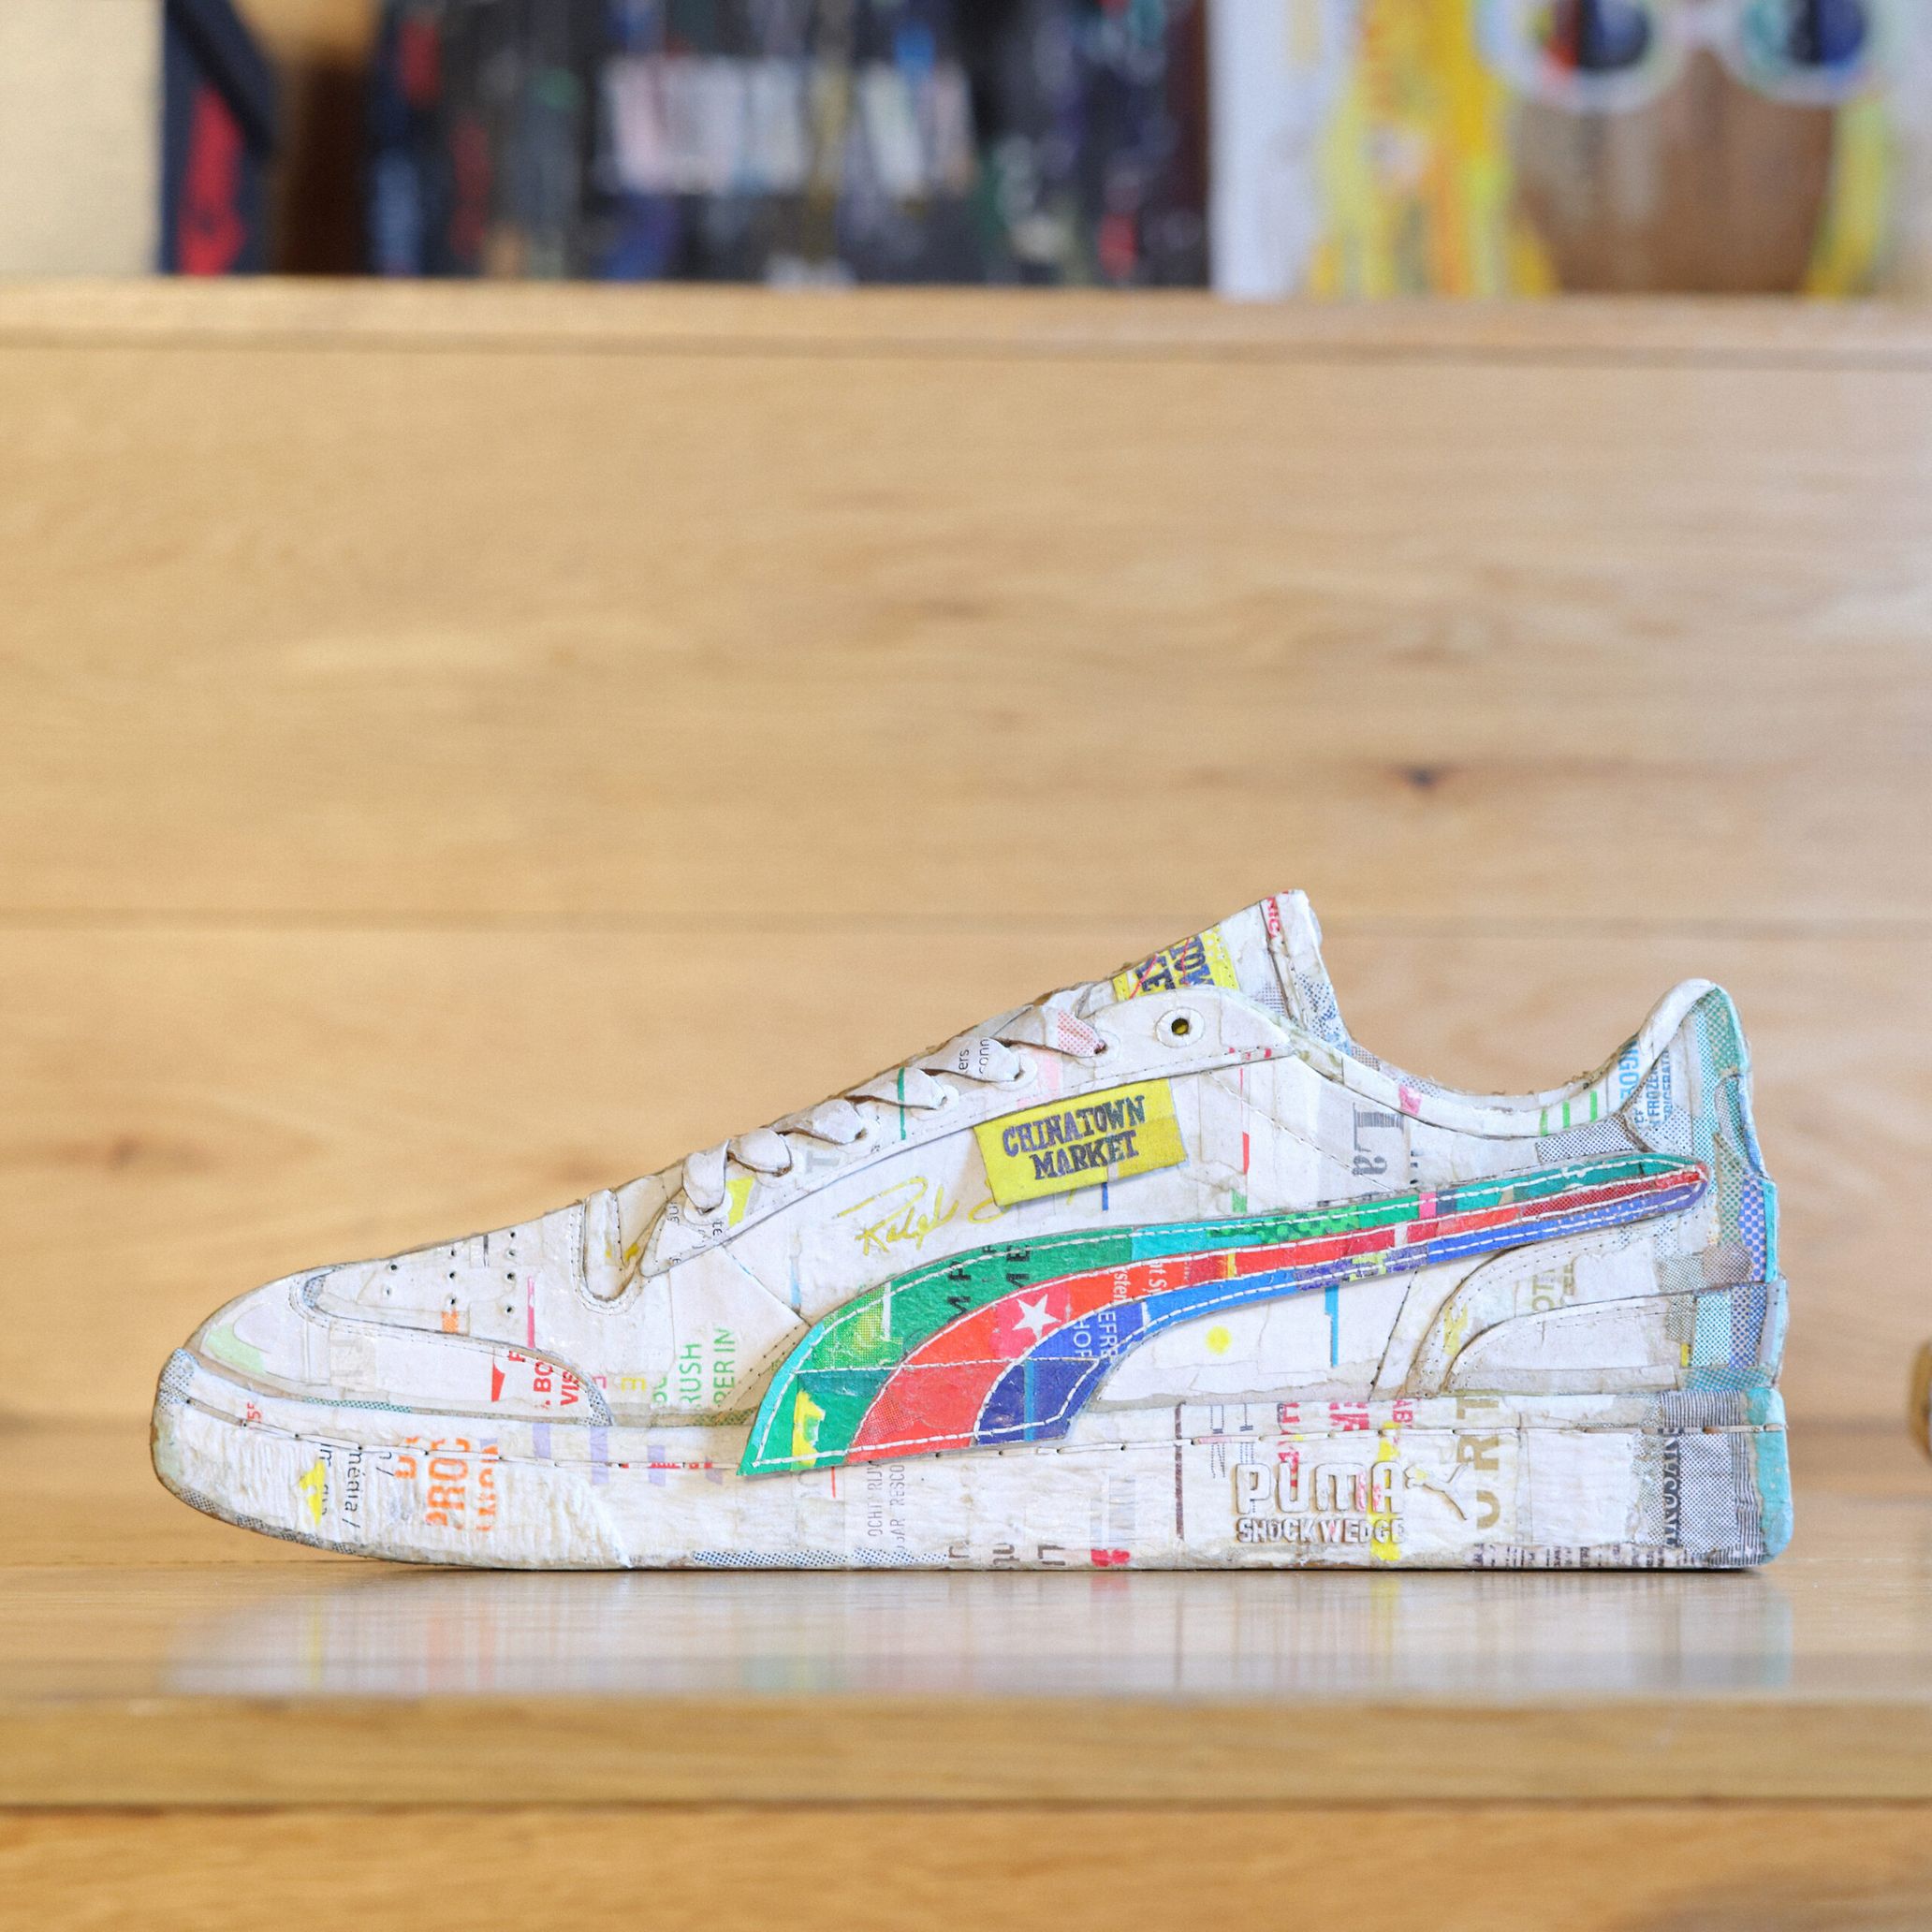 Sneakers as a motif of the artwork